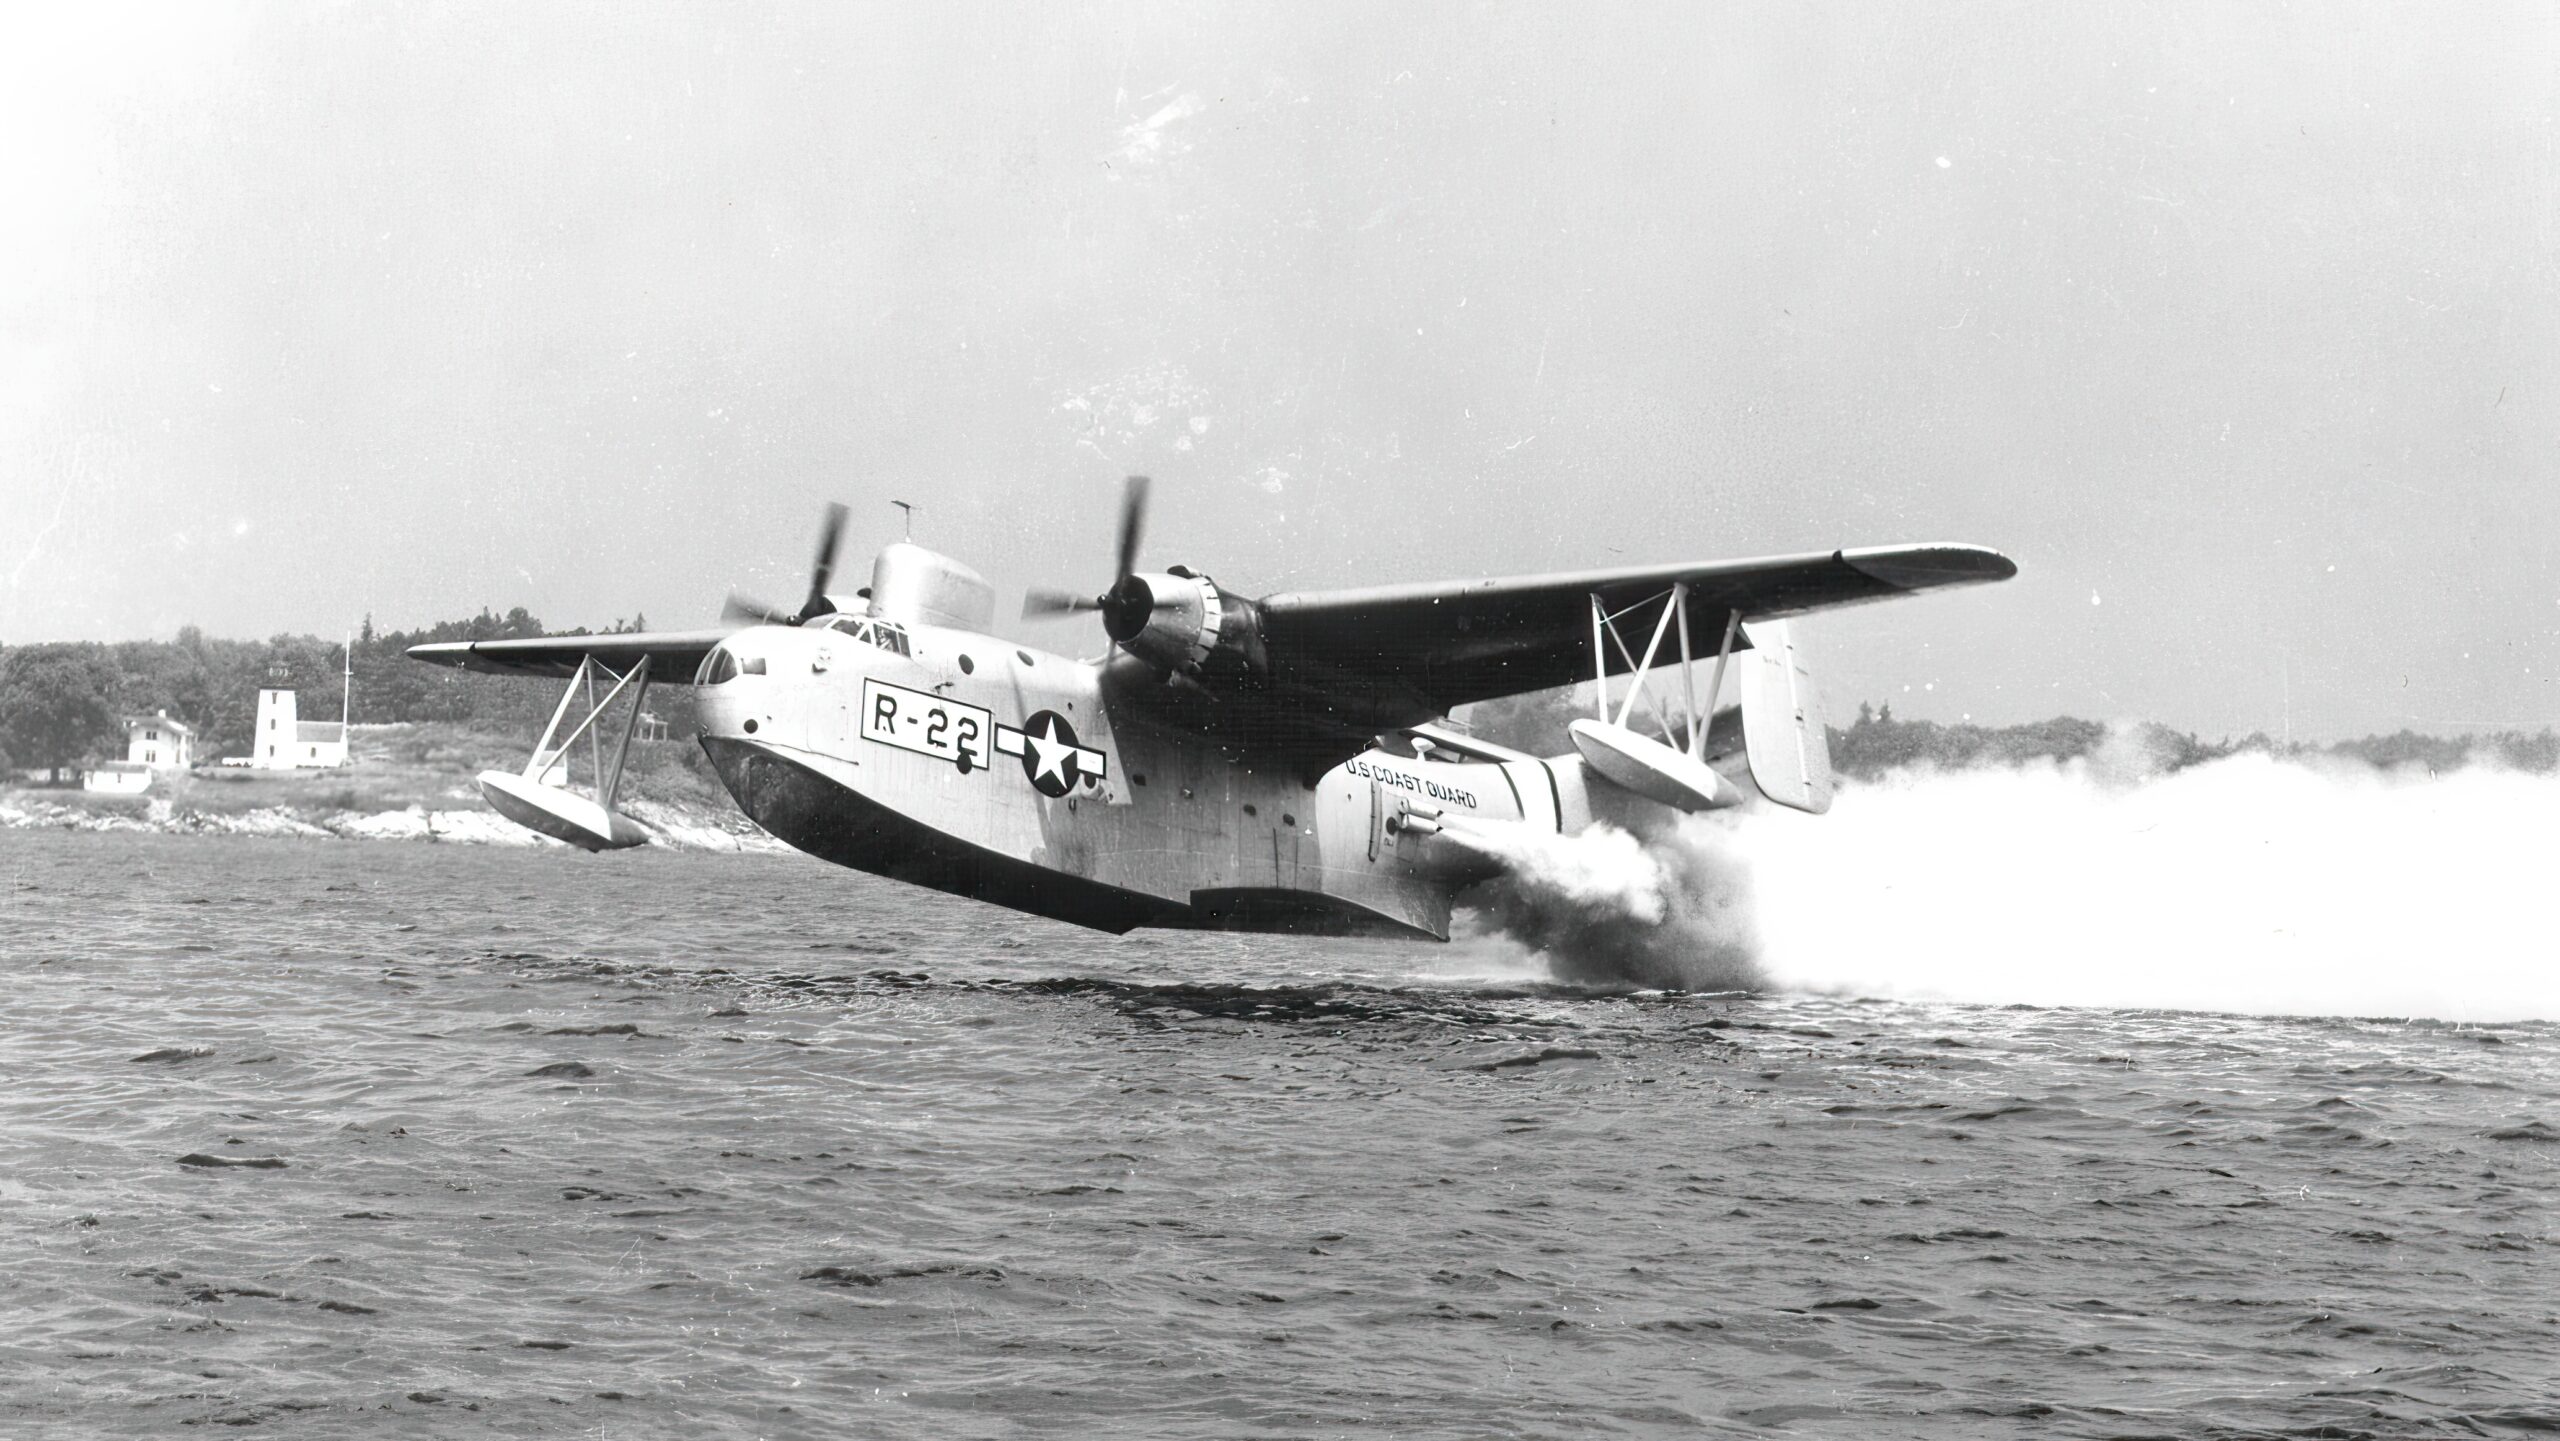 U.S. Coast Guard PBM takes off from the water assisted by RATO